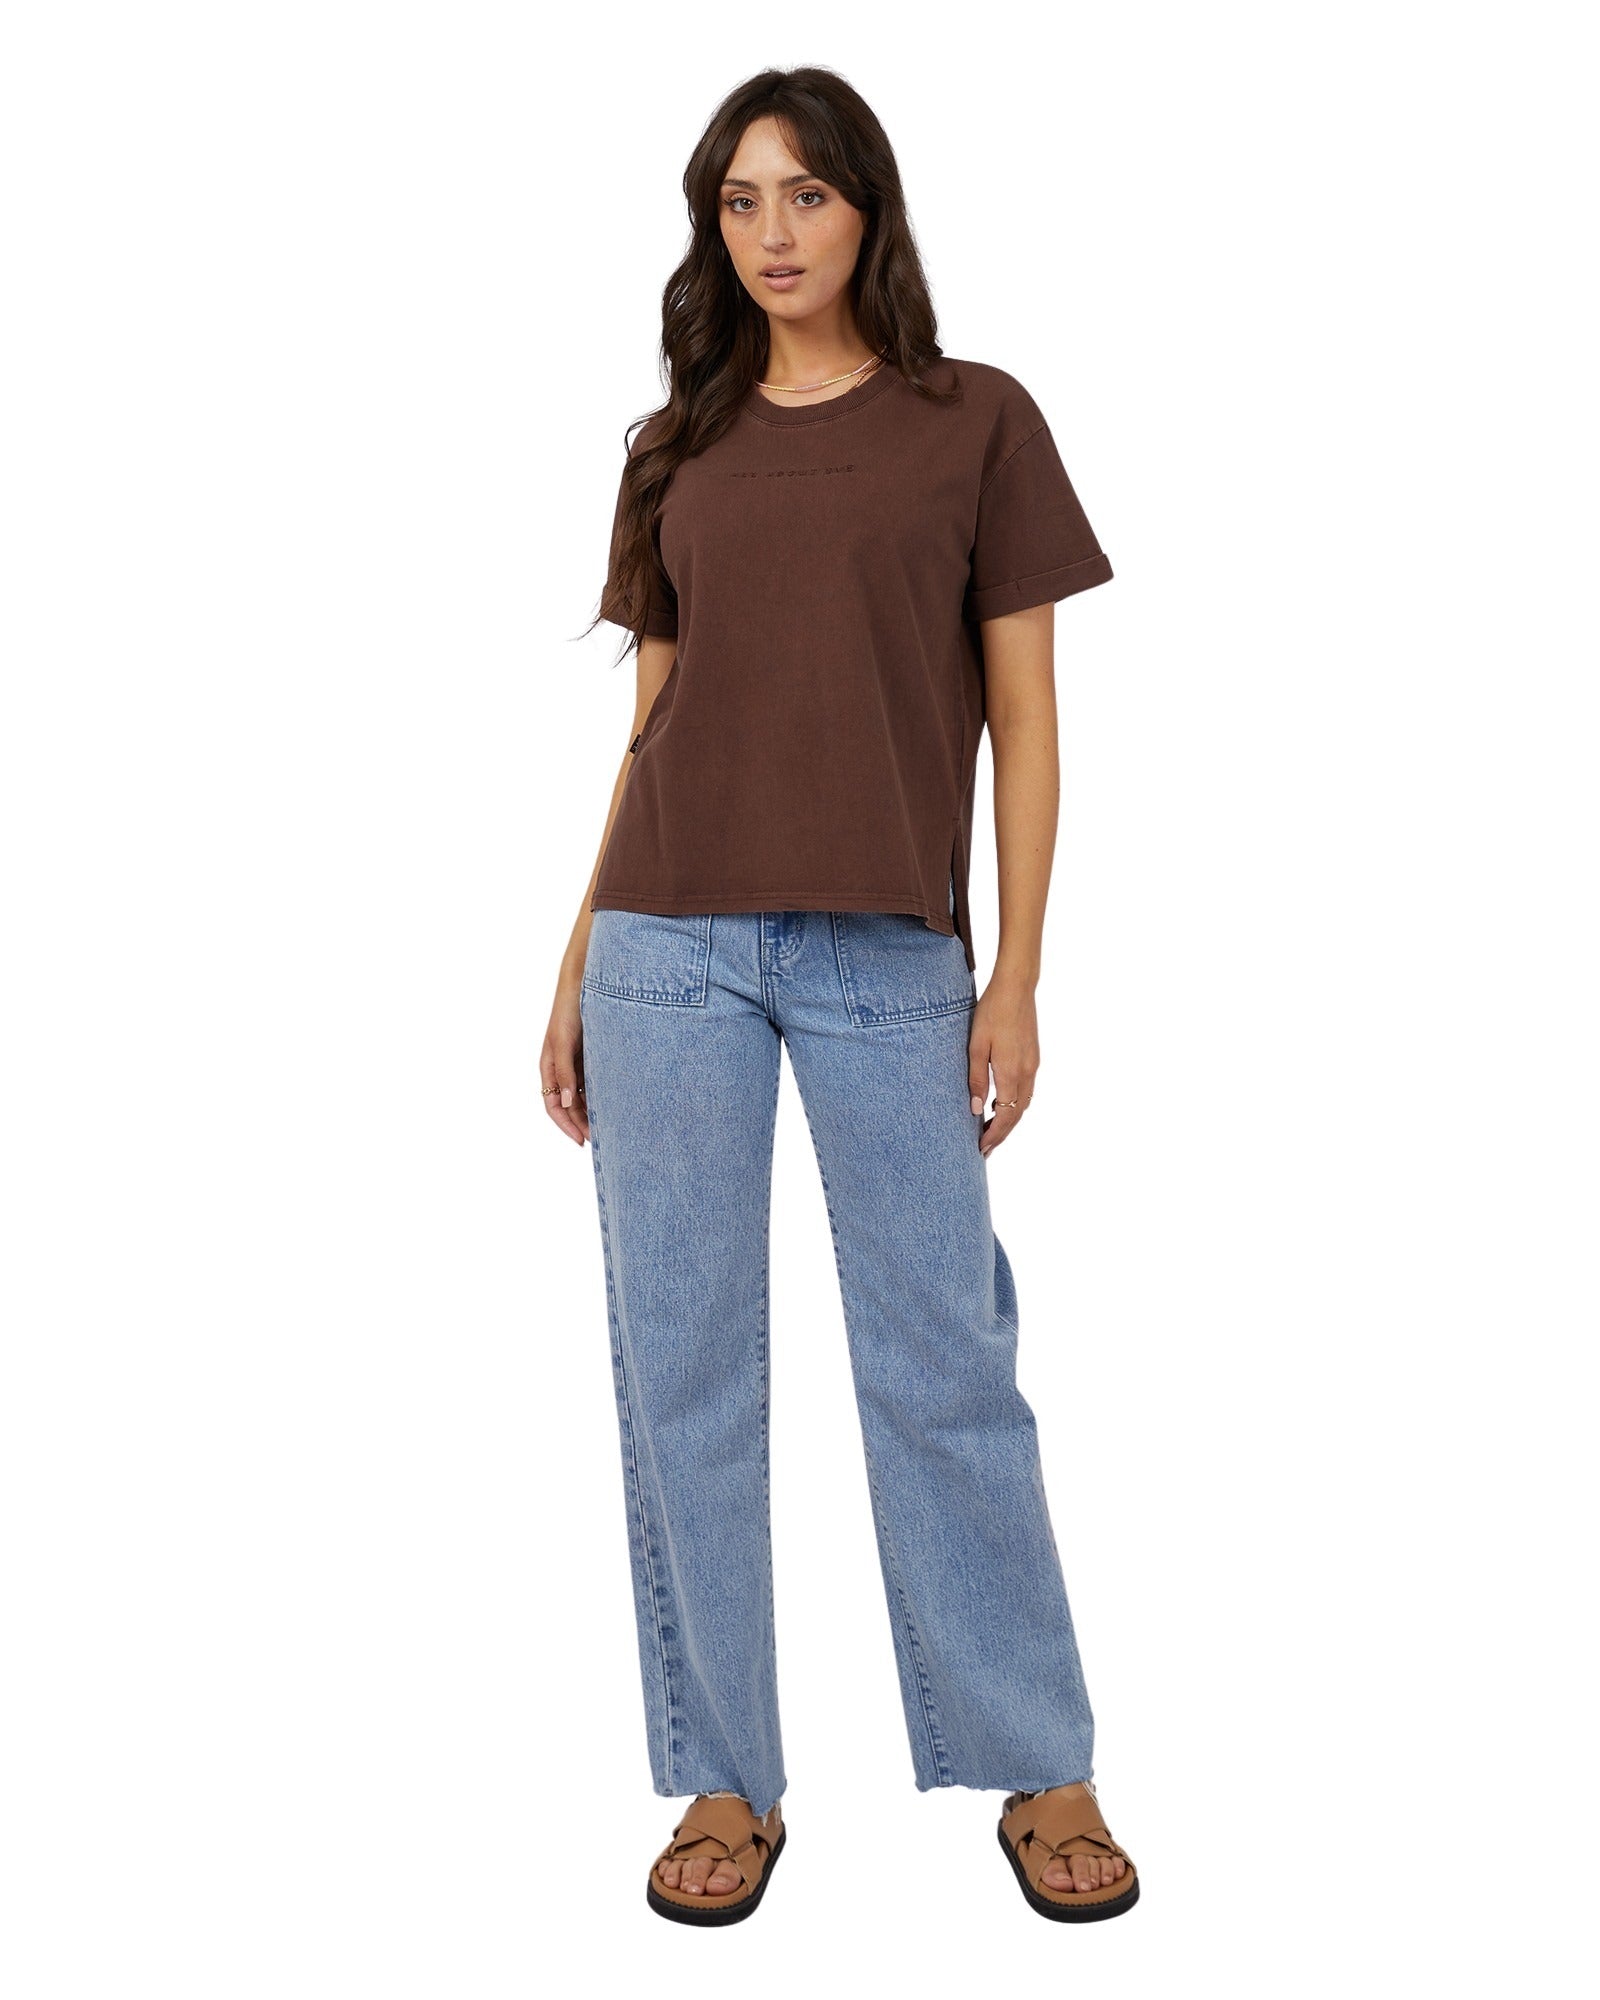 All About Eve - Washed Tee - Brown